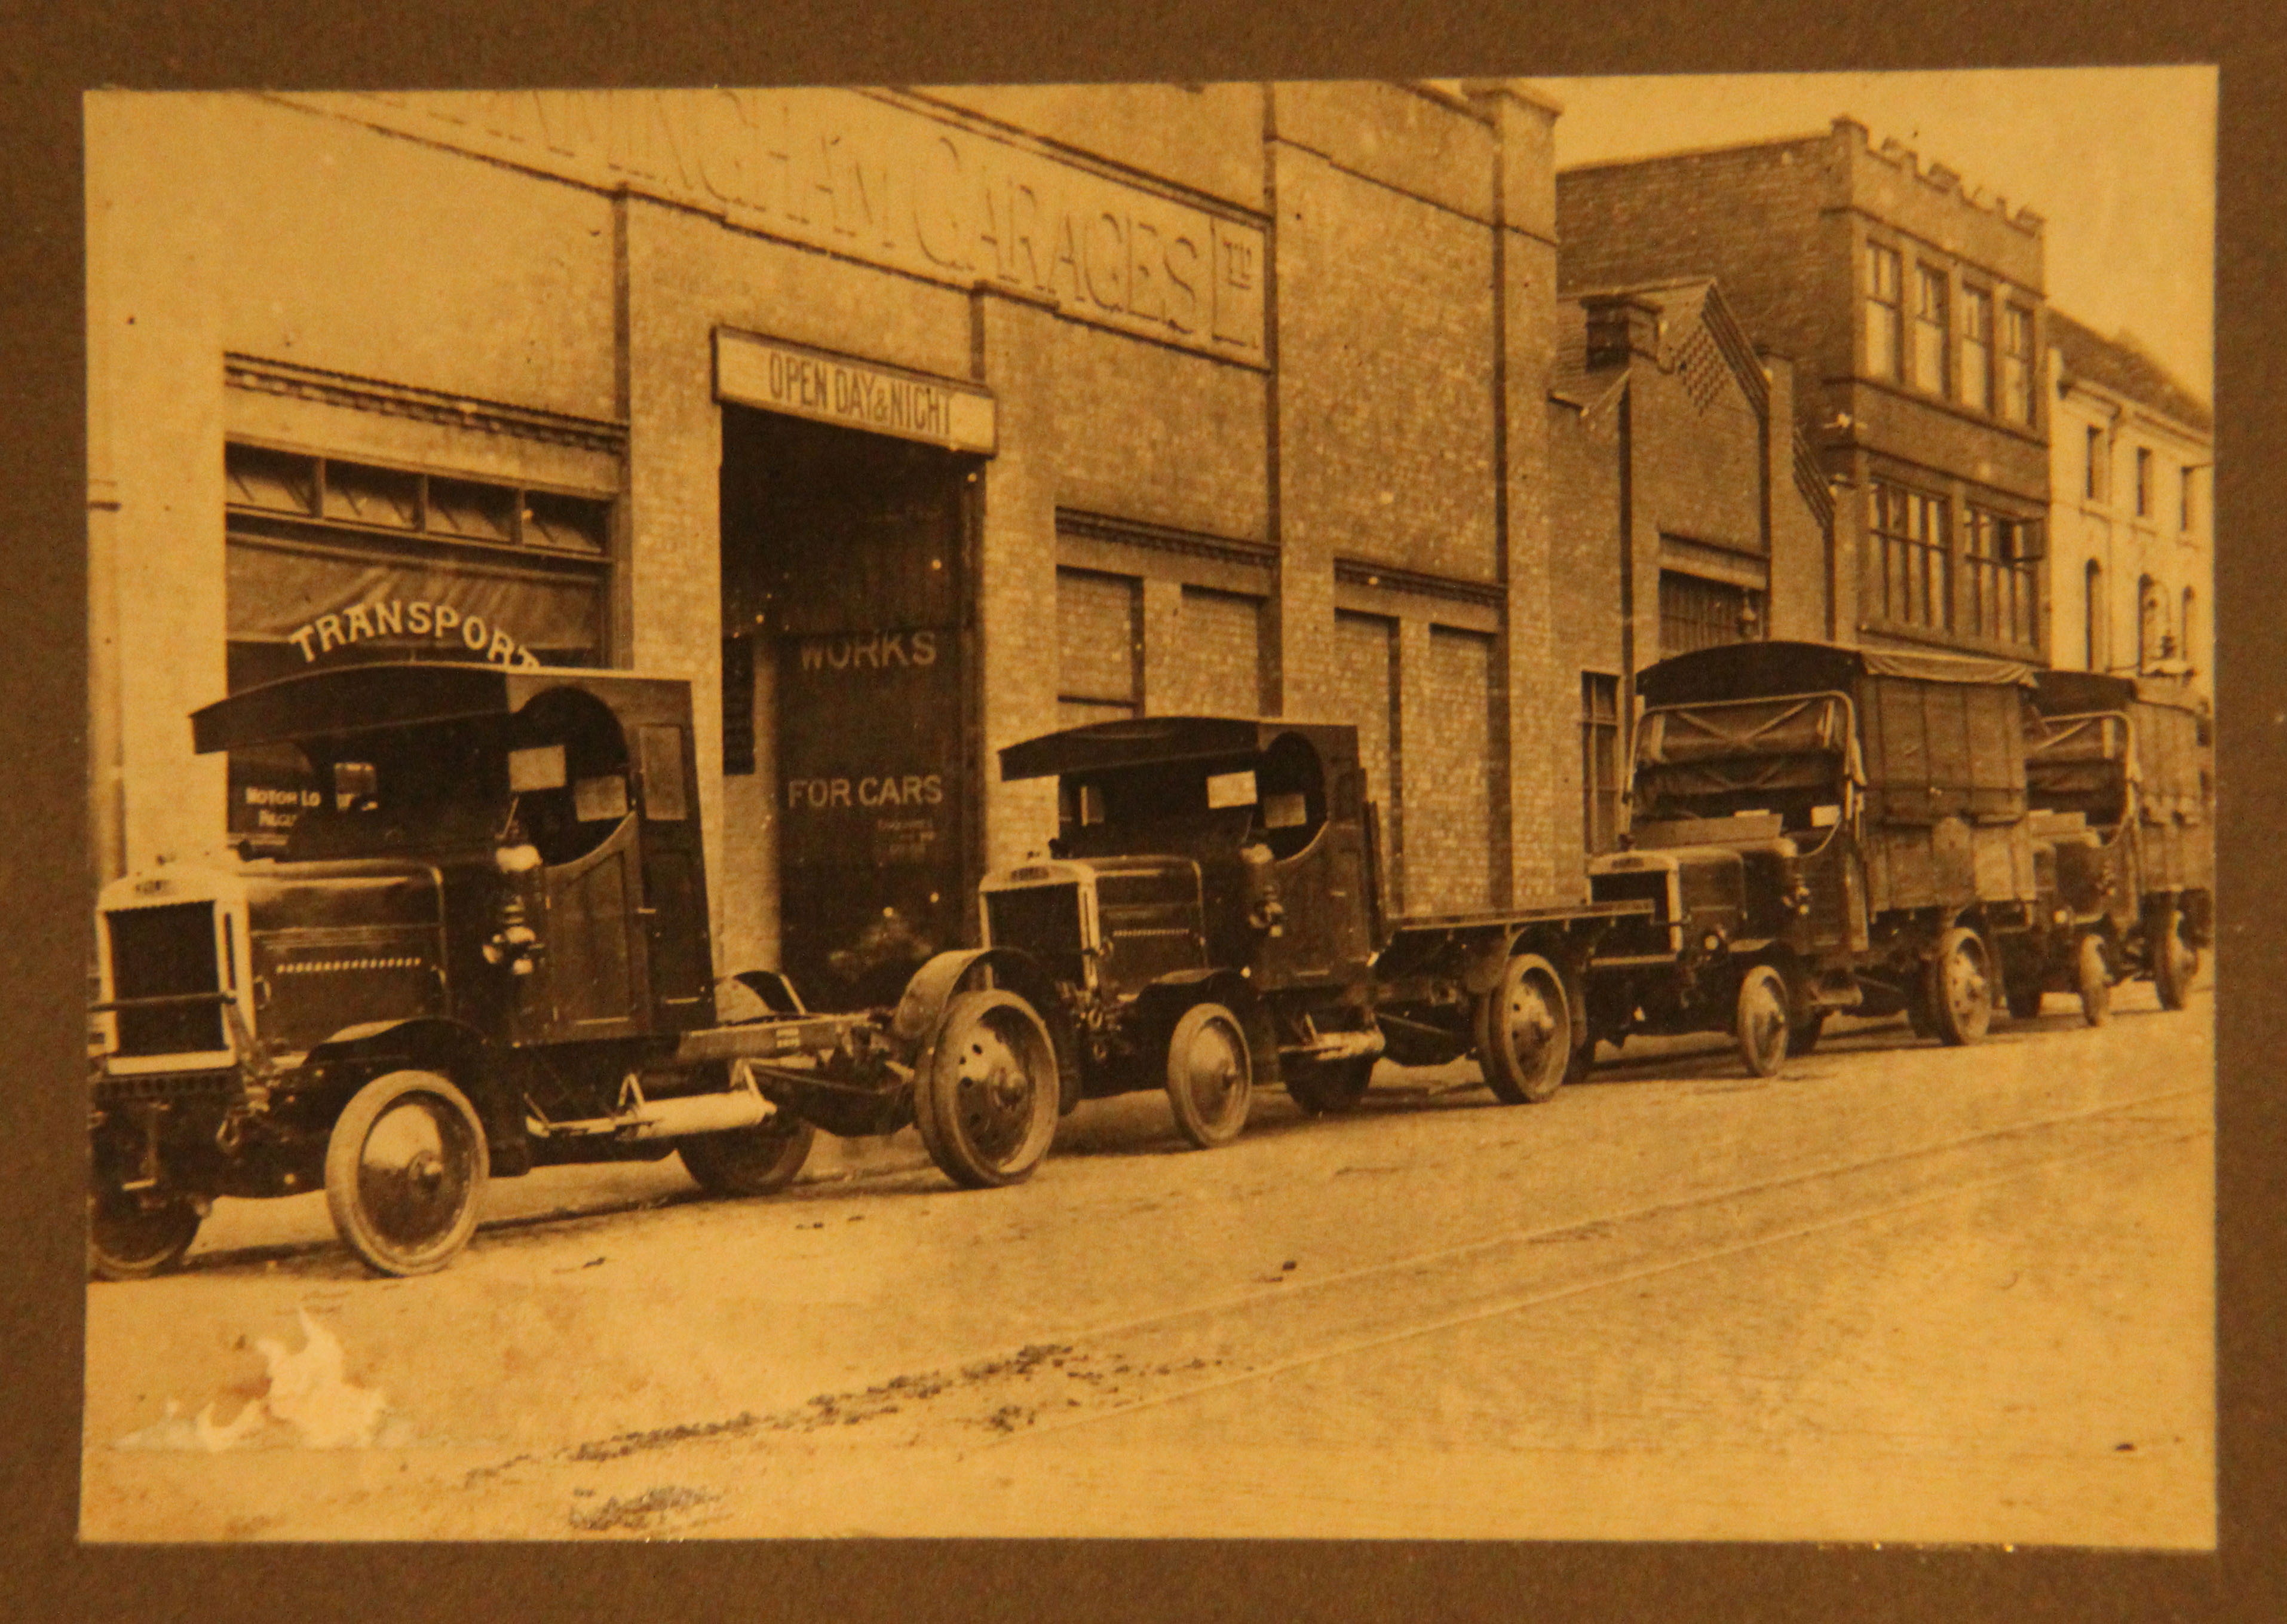 The Birmingham Garages Ltd. Authorised Dealers for Wolseley Cars. - Image 9 of 12